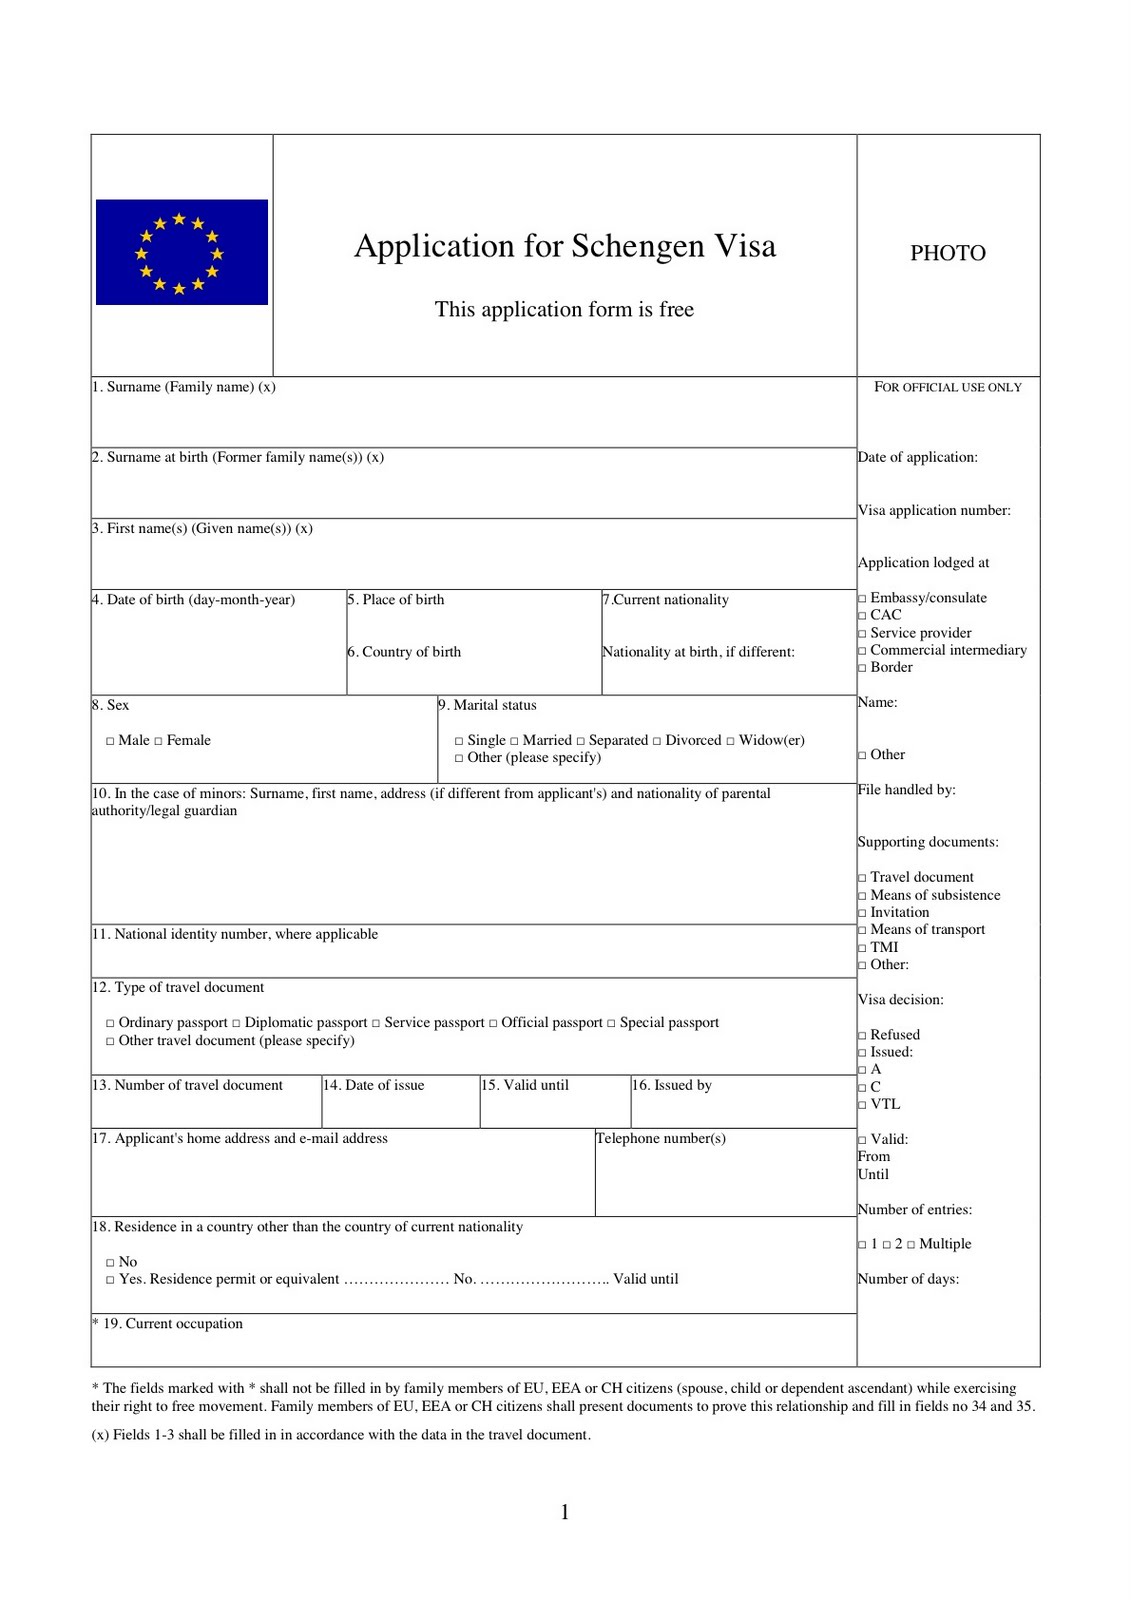 ... well filled out form, would be the attached documents that prove